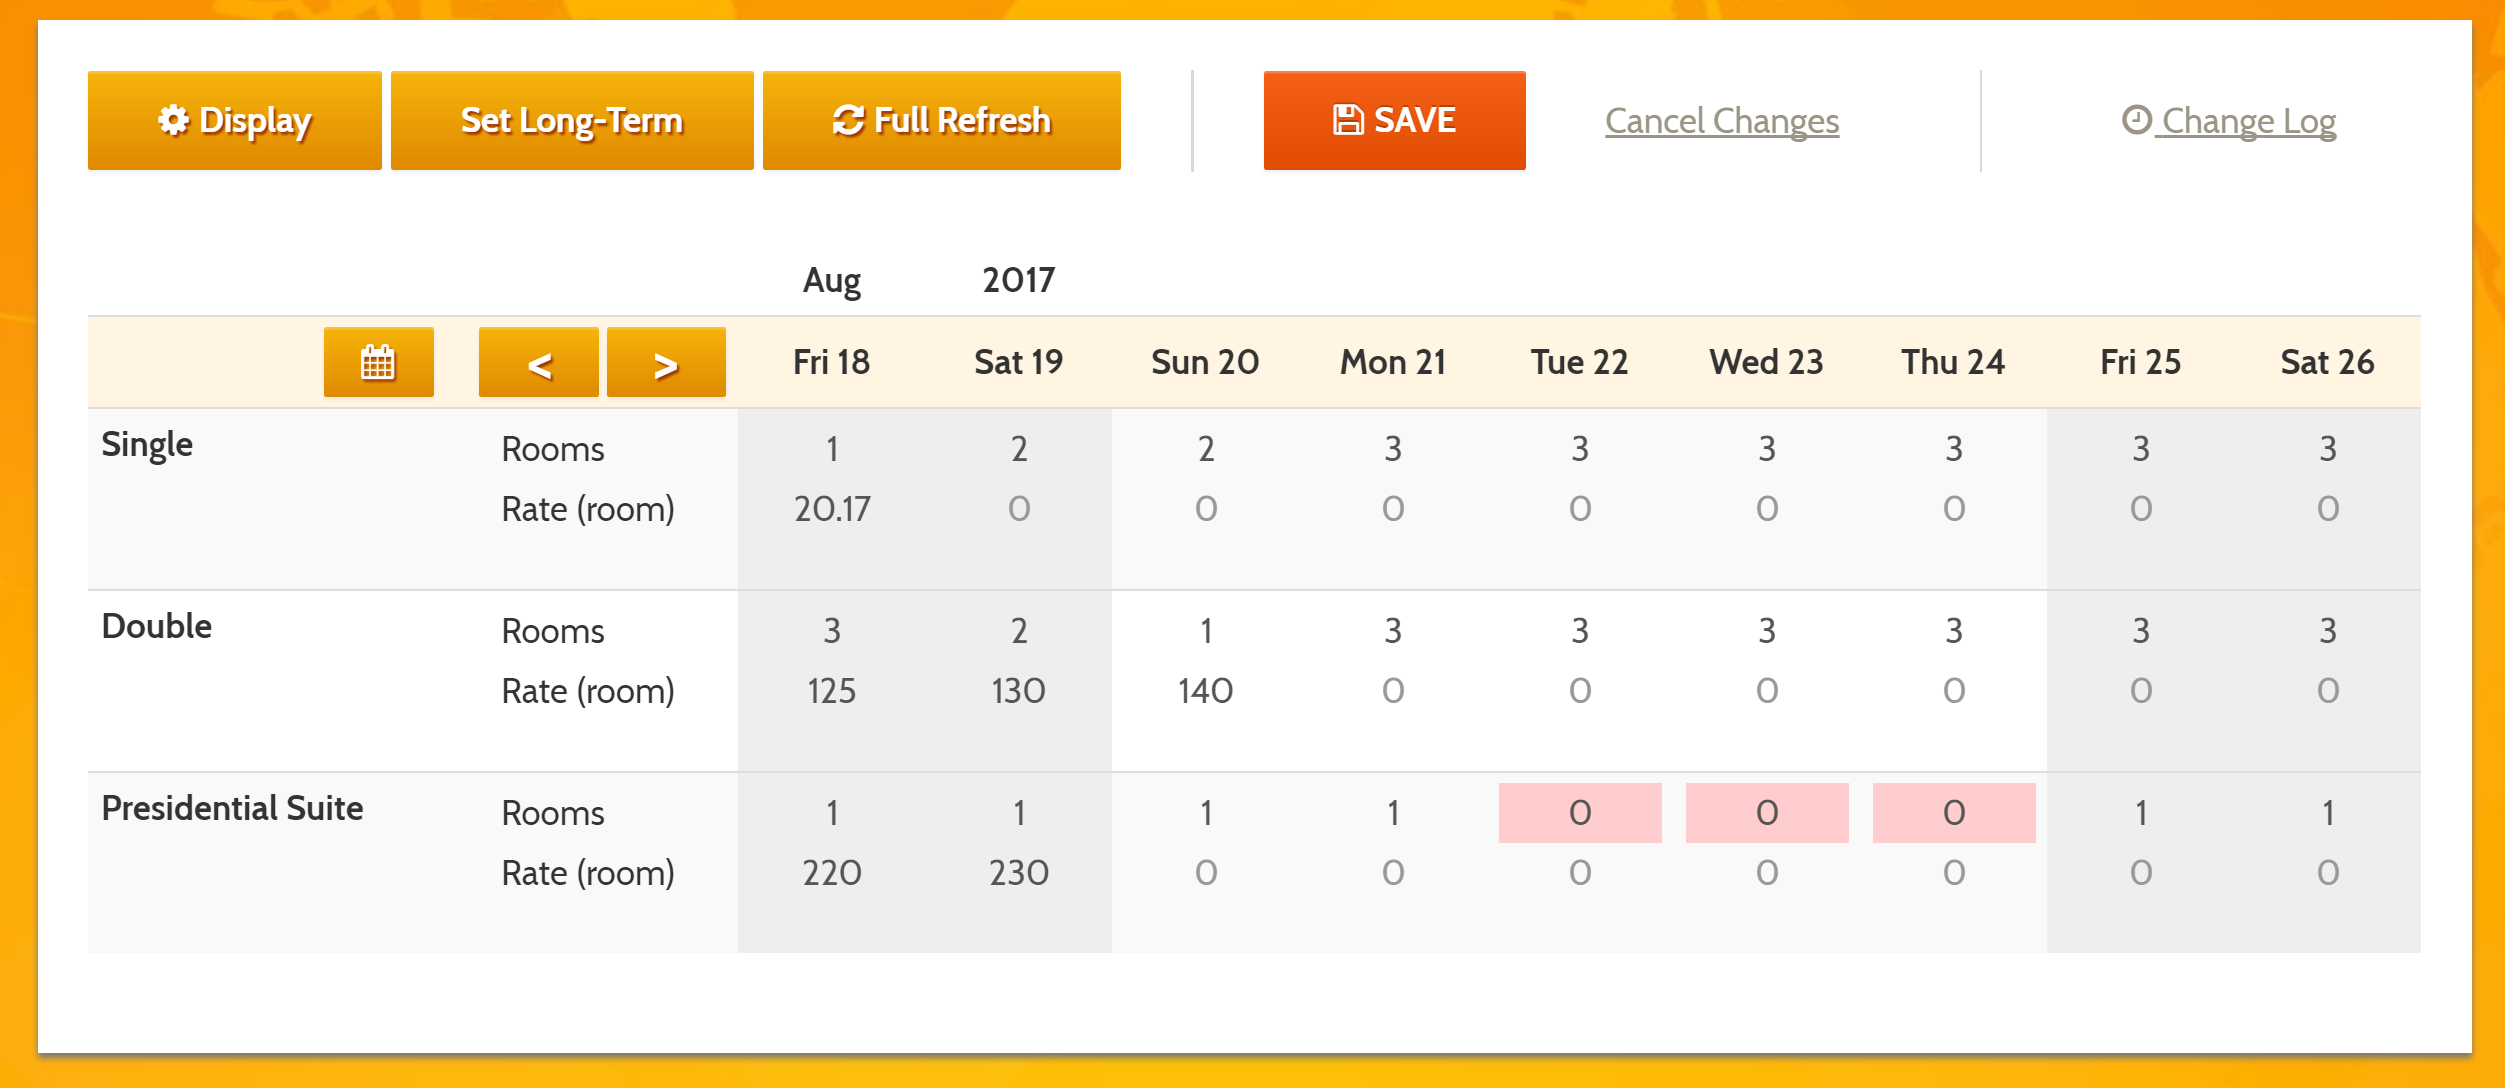 MyAllocator Calendar by Bellebnb.com calendar, with the BAR used in your Front Desk and Booking Engine along with the number of rooms available for each type for each date.